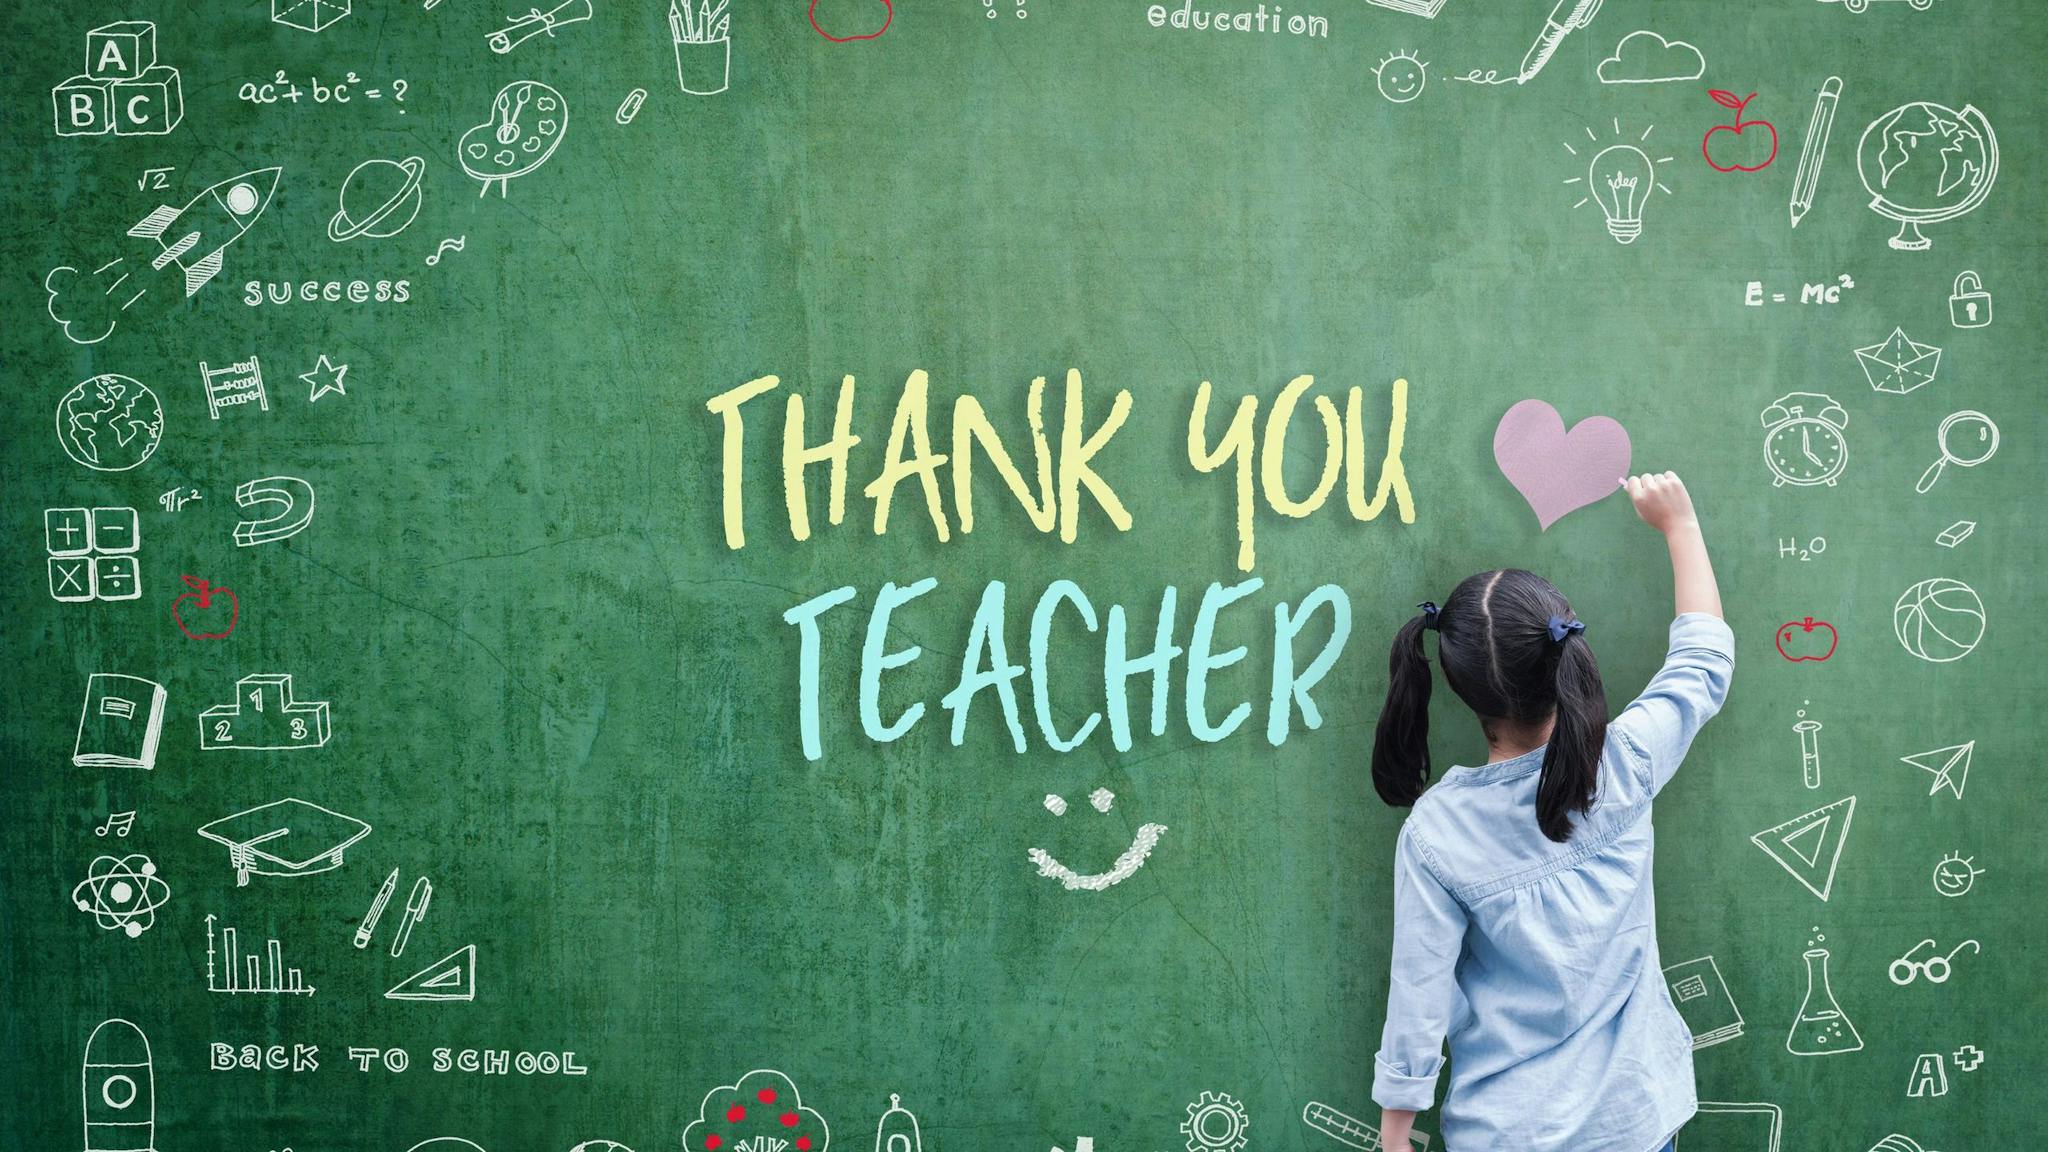 Gratitude and resilience in education